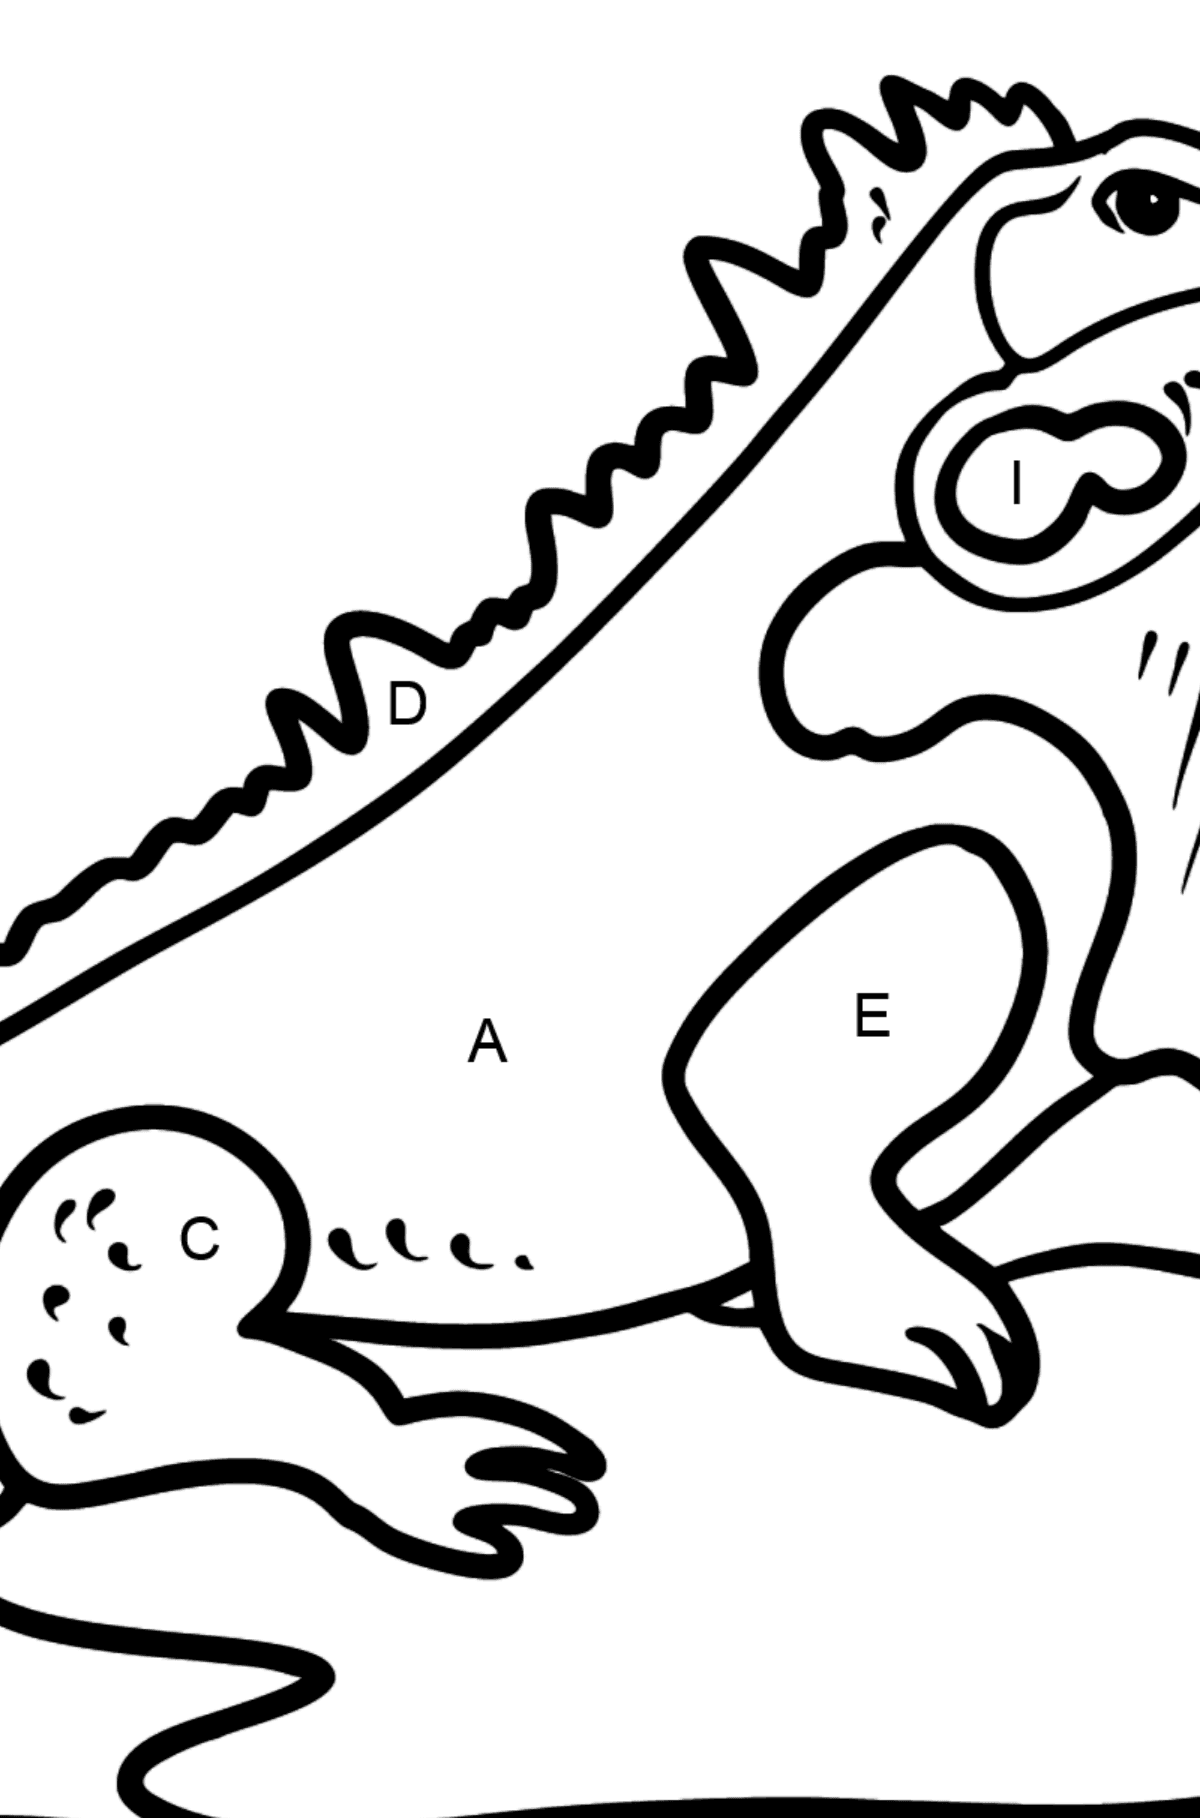 Spanish Letter I coloring pages - IGUANA - Coloring by Letters for Kids